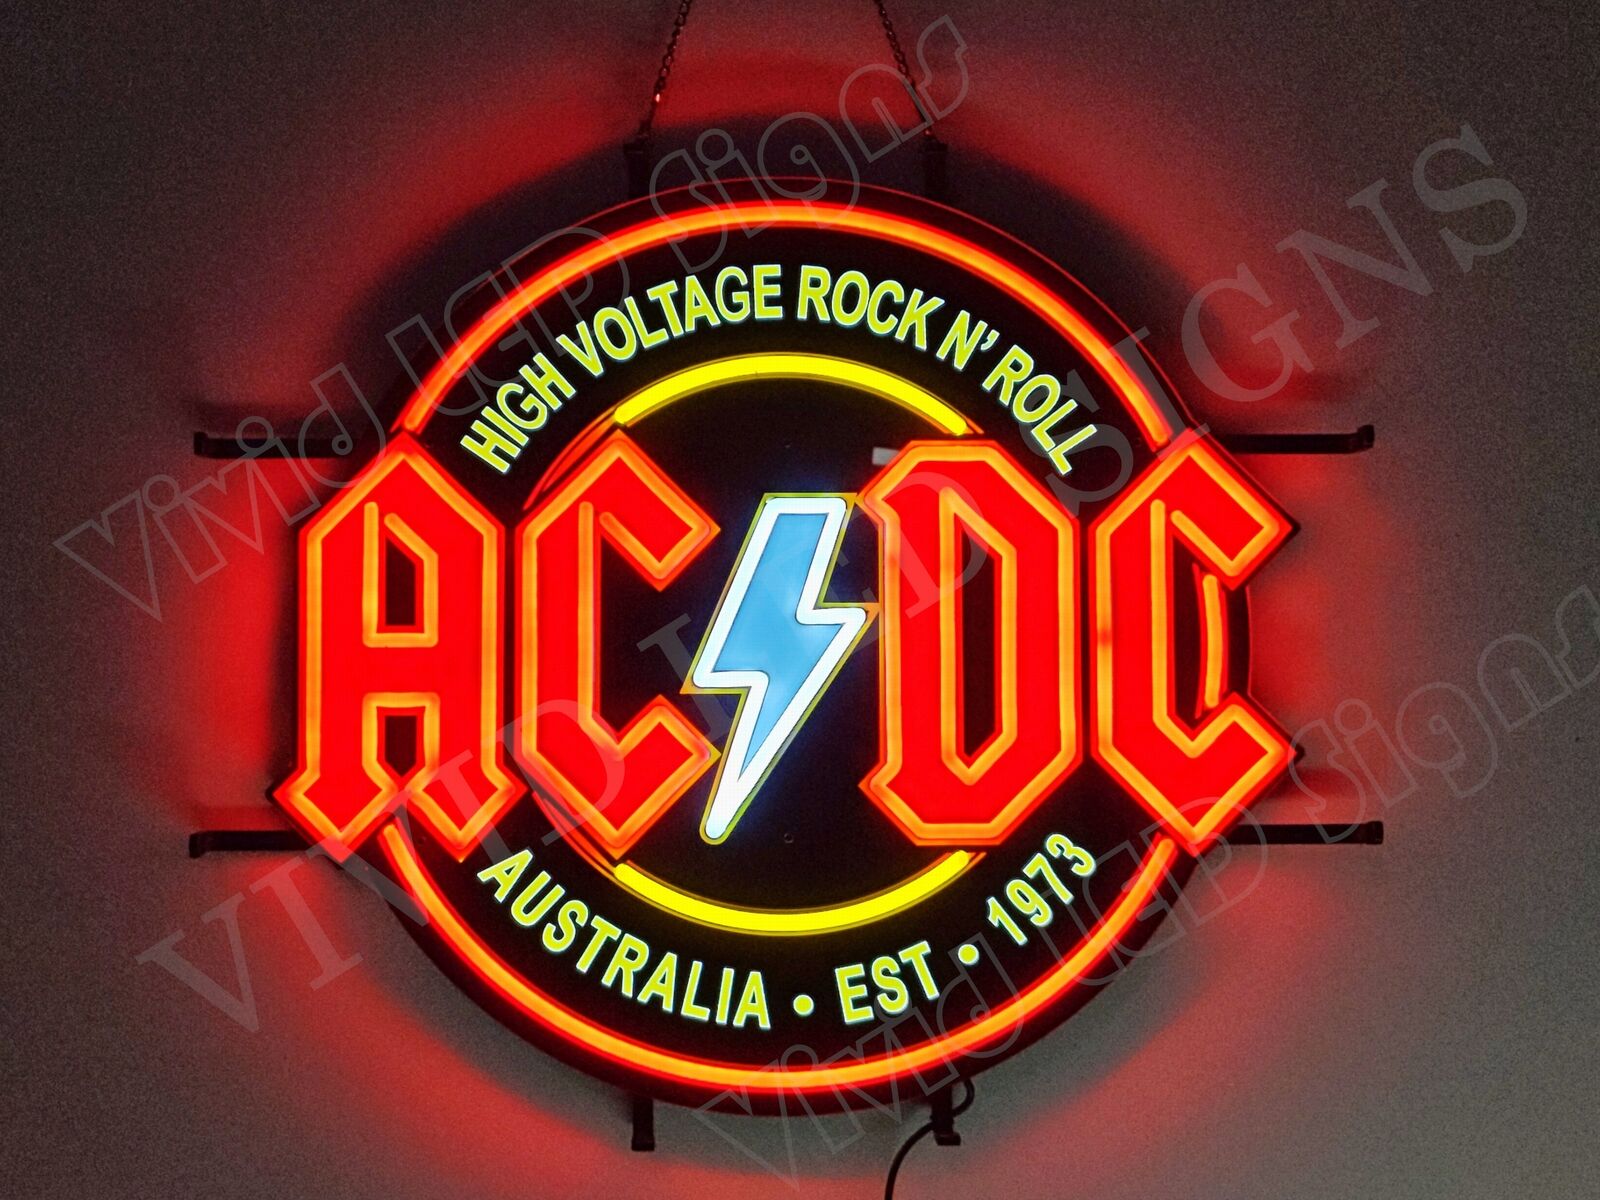 ACDC High Voltage Rock N Roll Patch 24